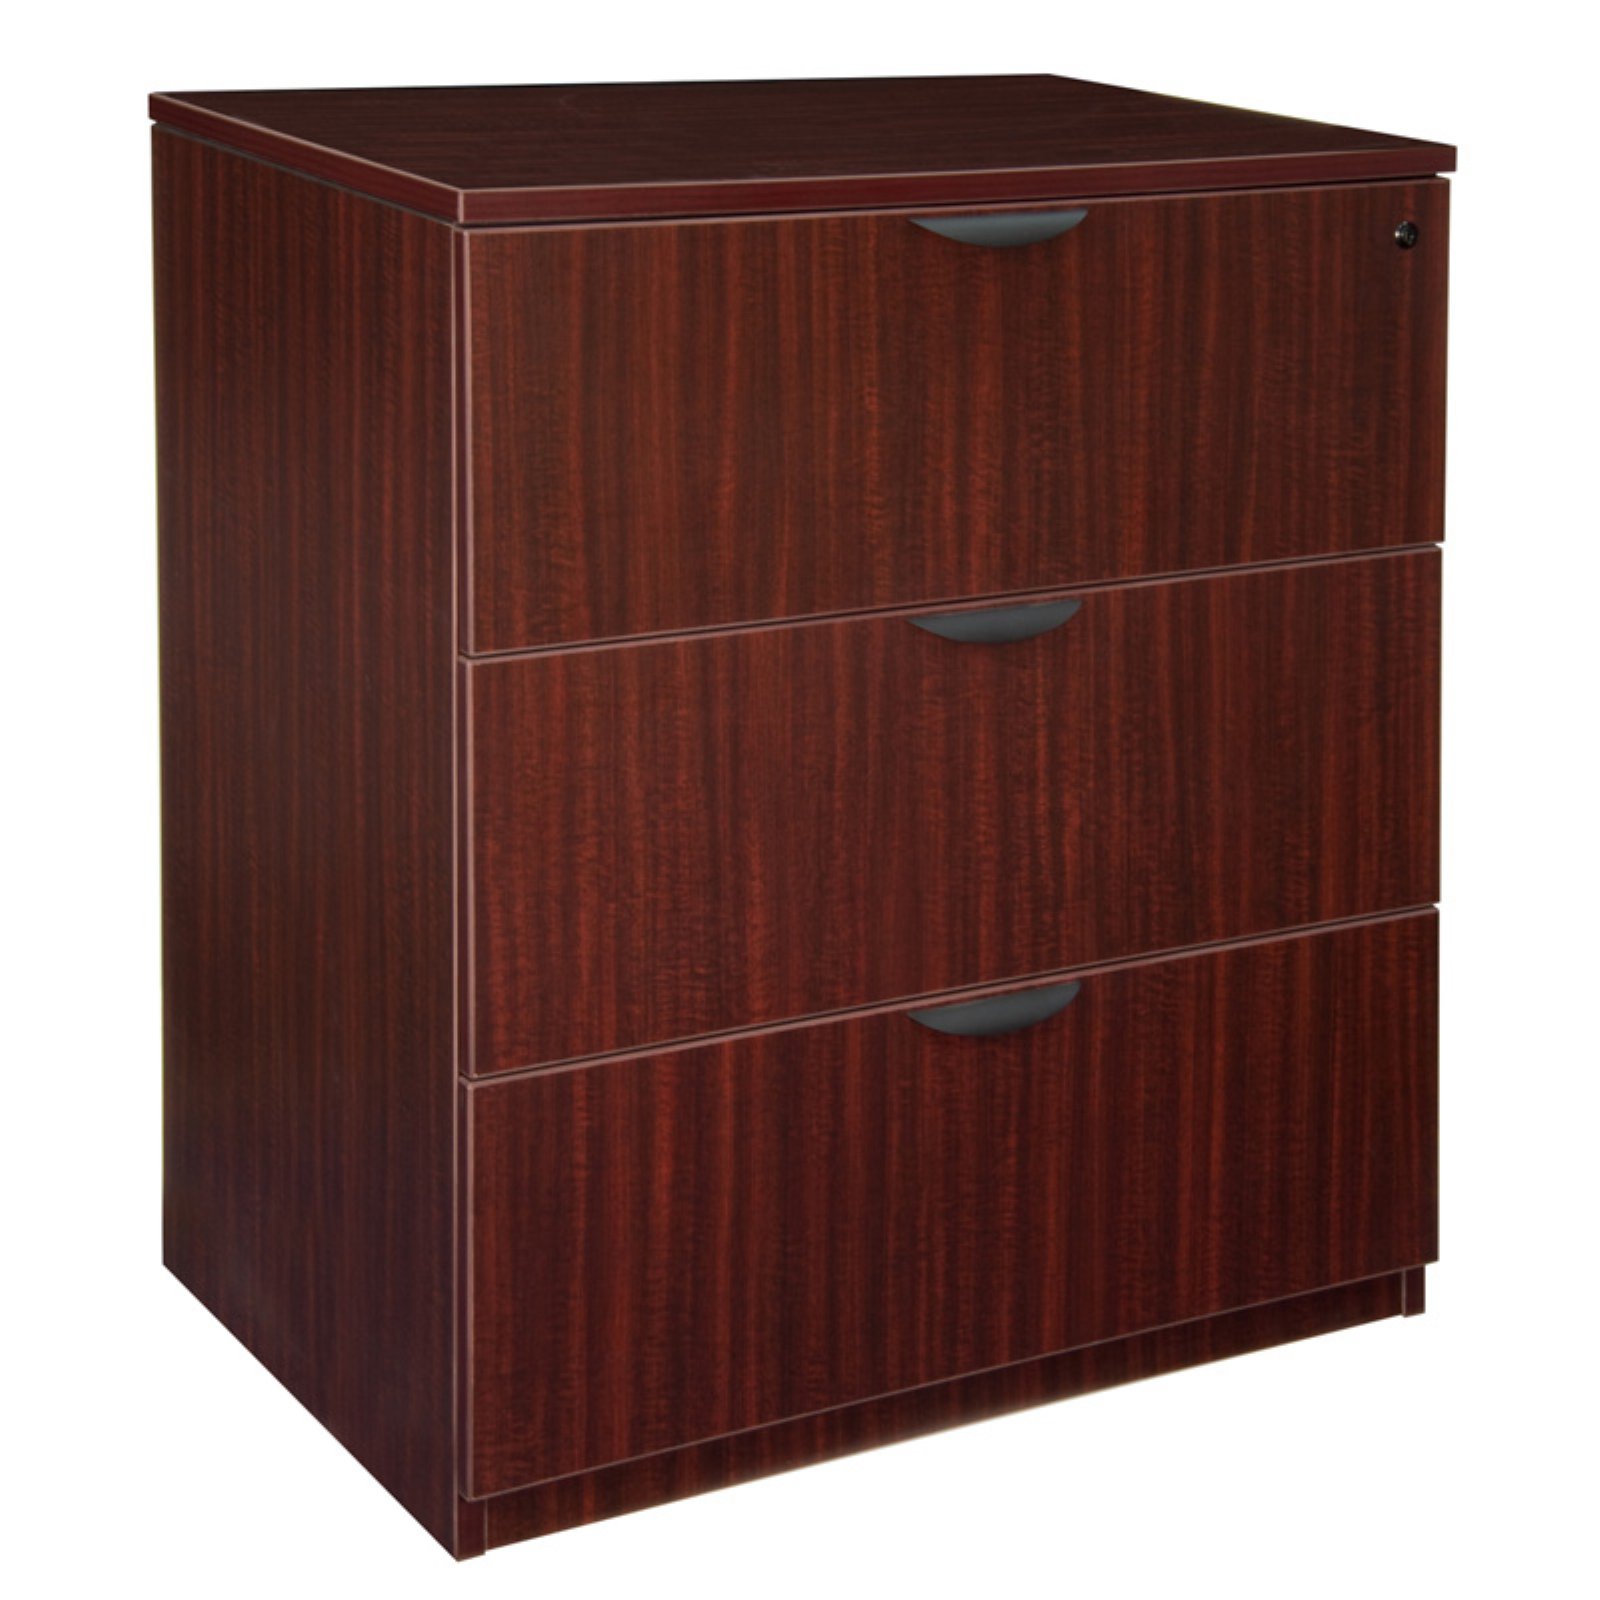 Regency Legacy Stand Up Lateral File- Mahogany - image 1 of 2